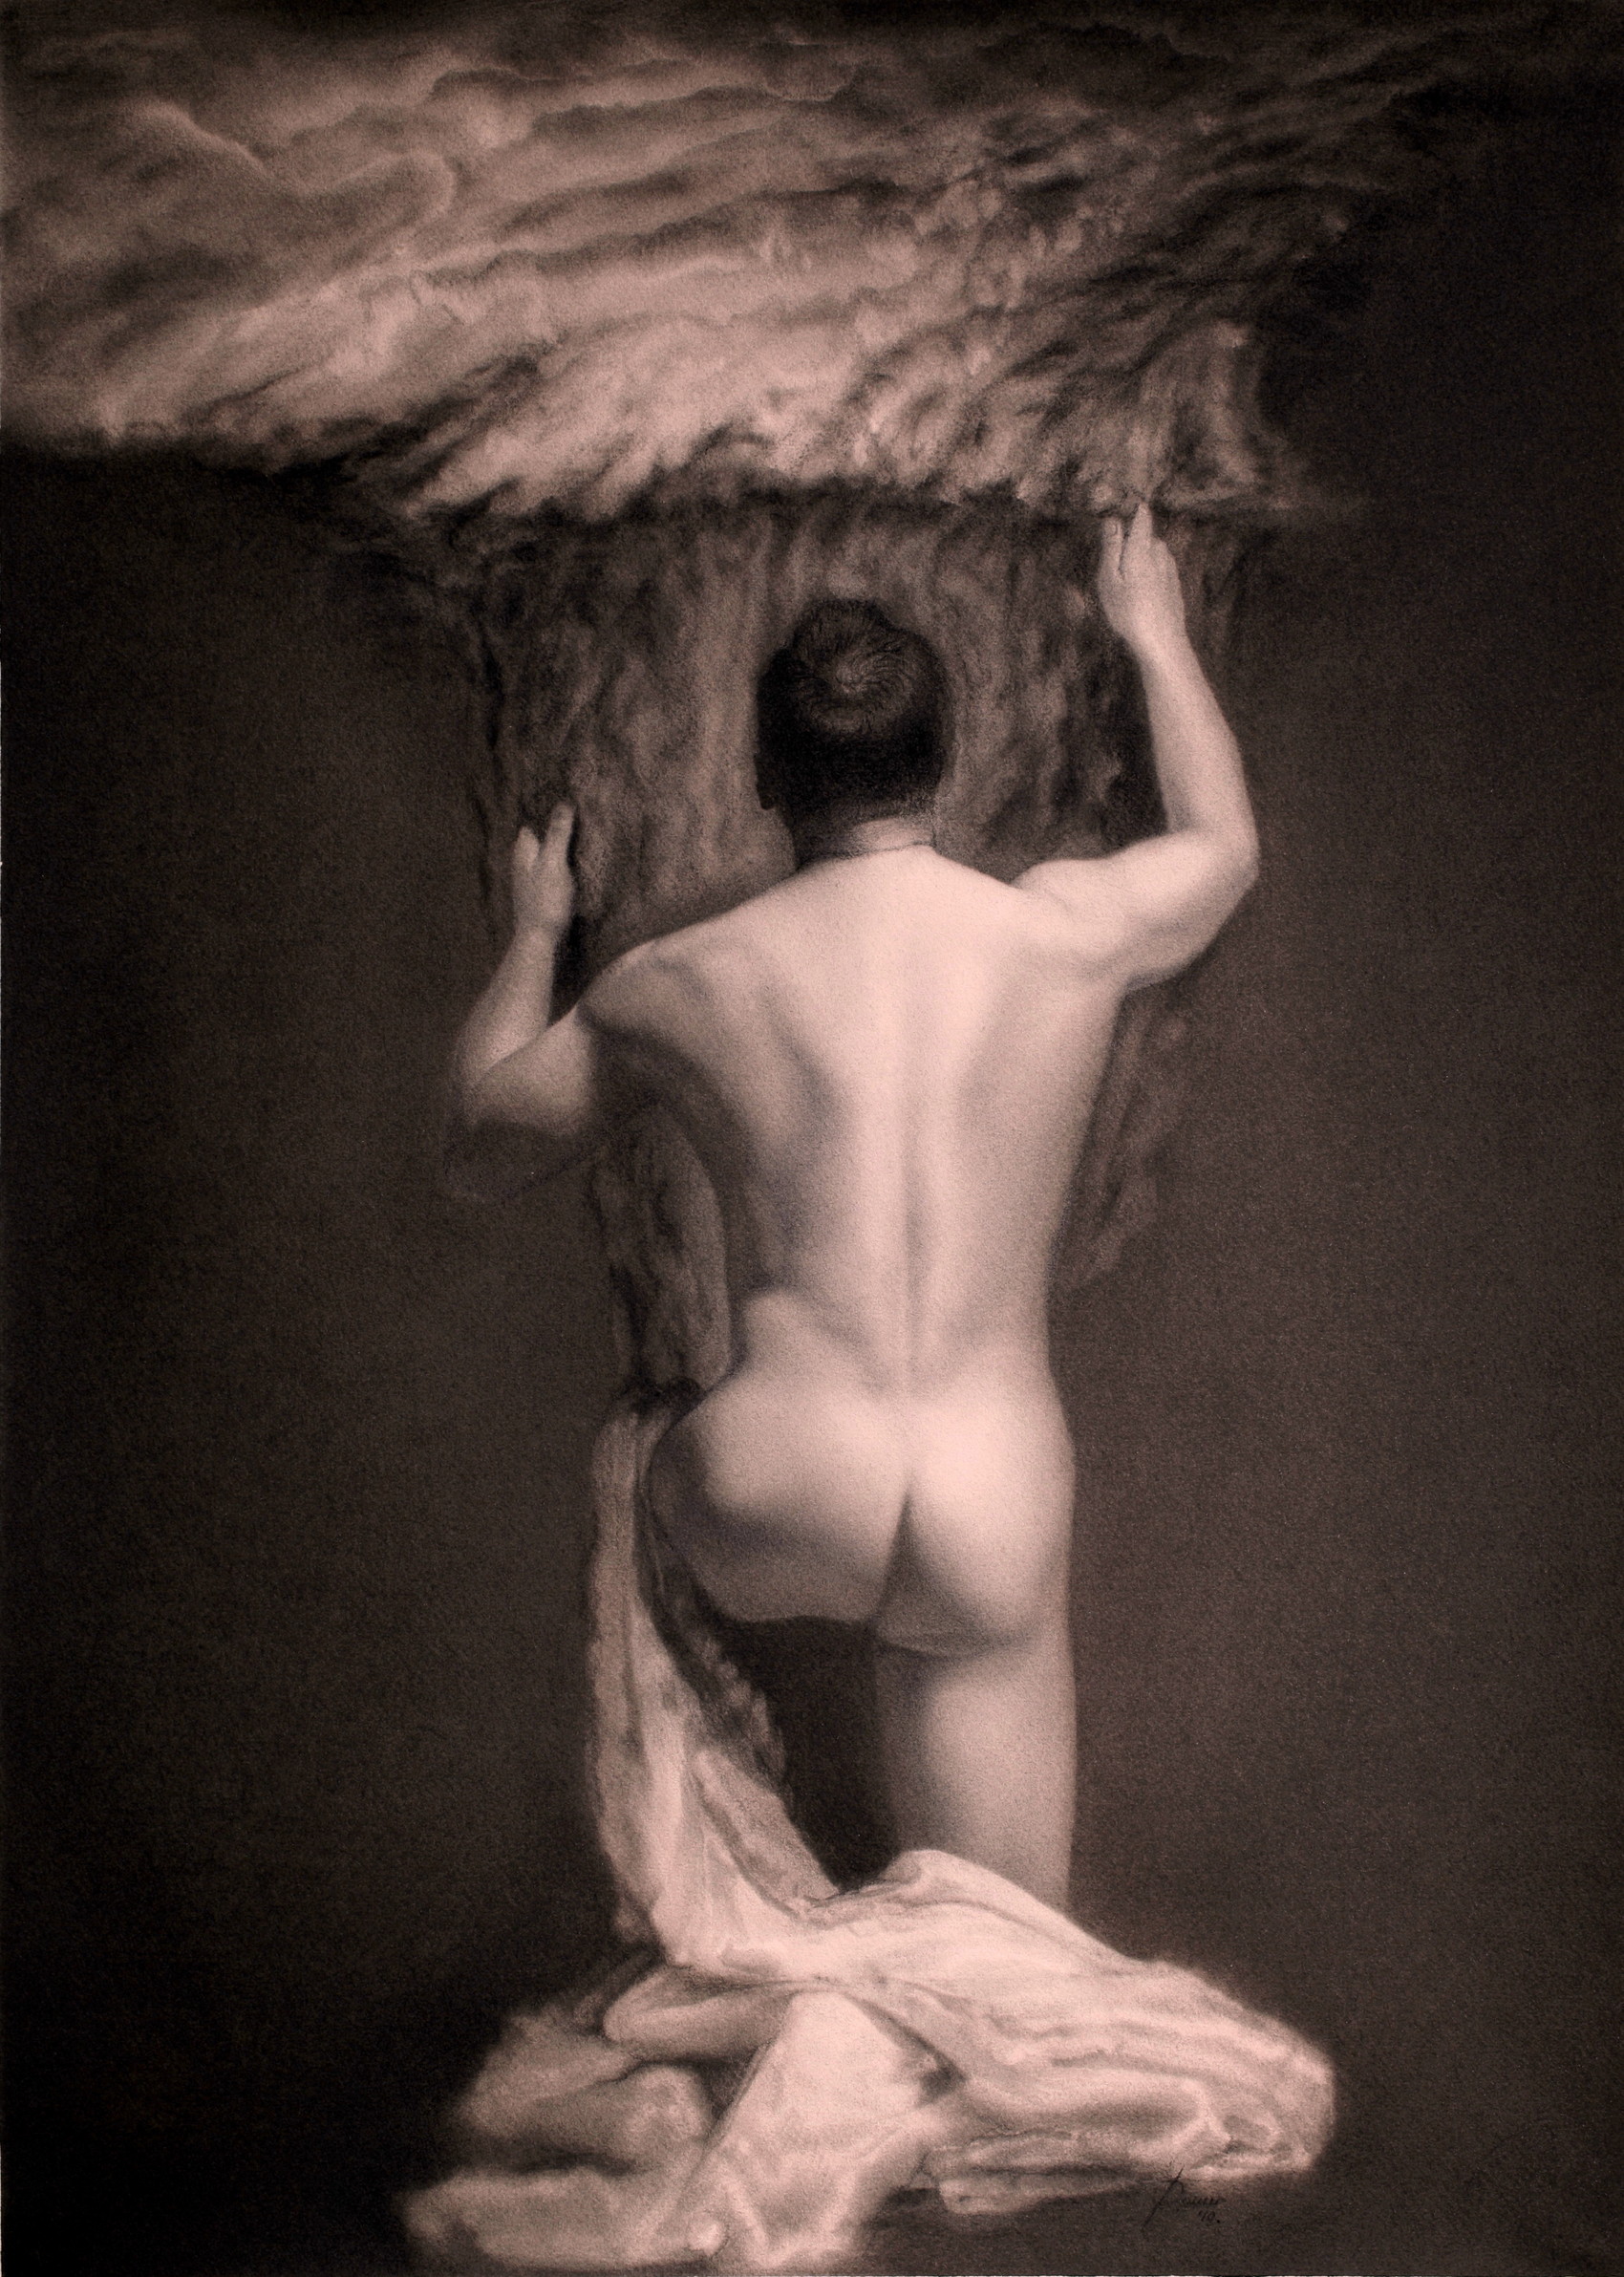 Damir May Aquilo male nude holding the storm and wind